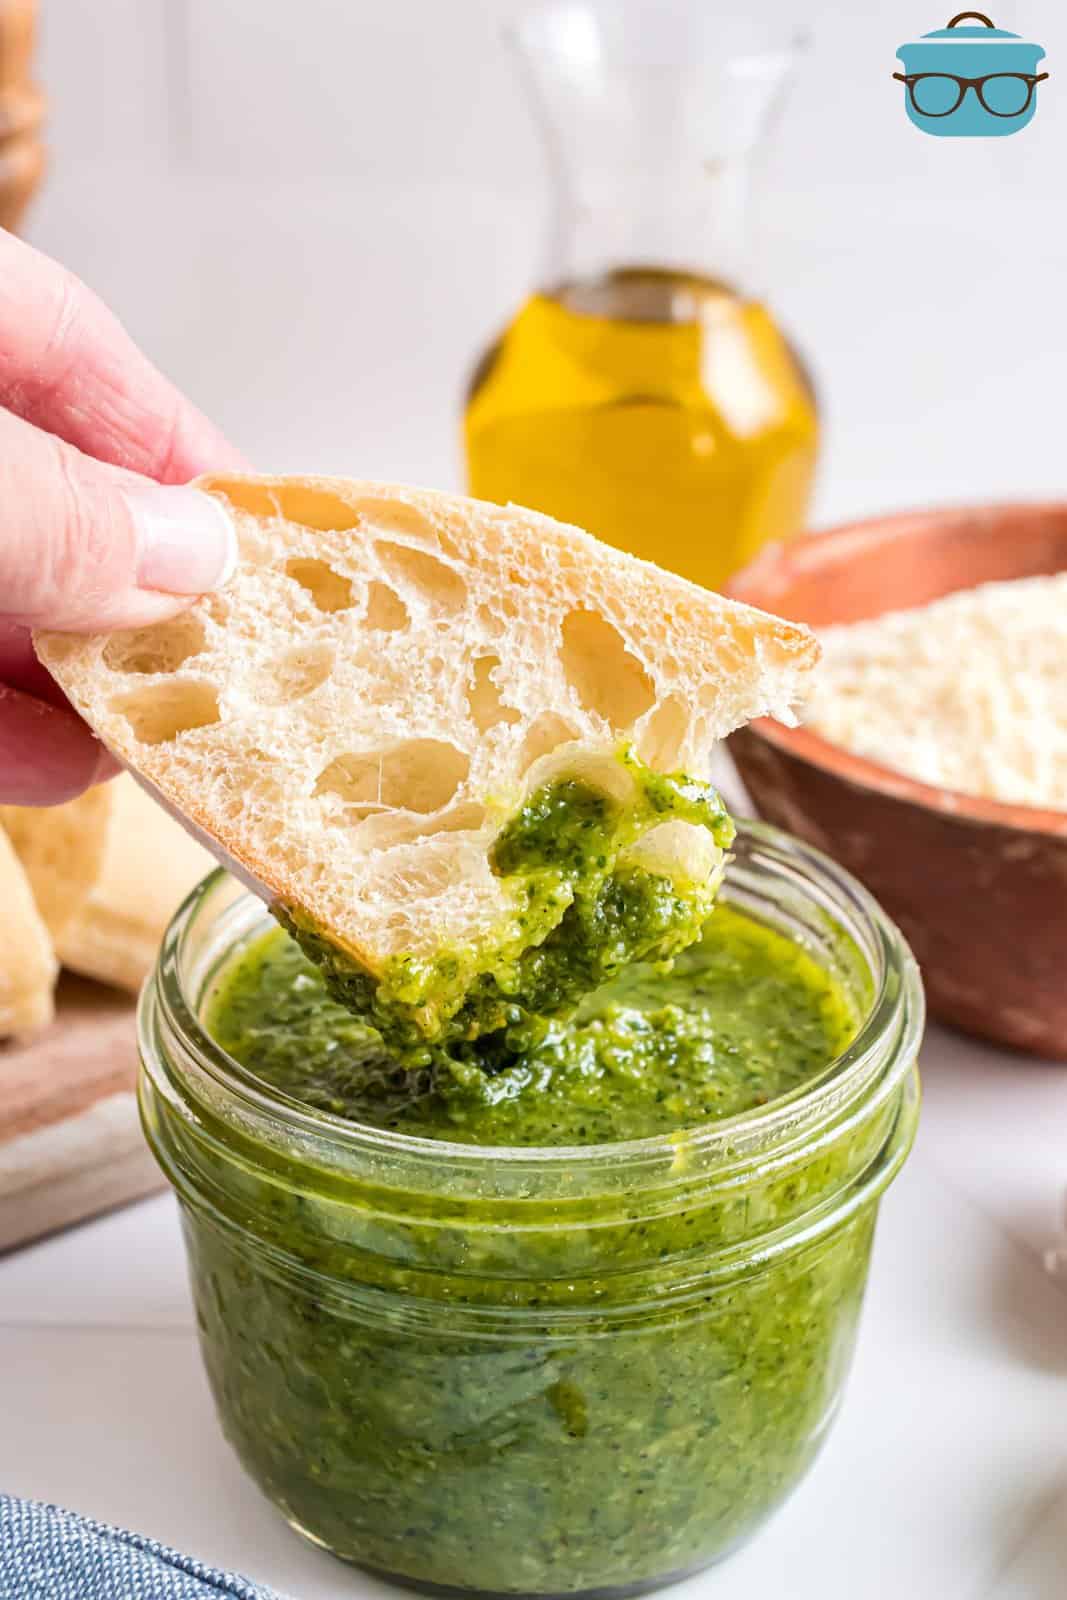 A piece of dipping bread with some basil pesto on it over a jar of it.